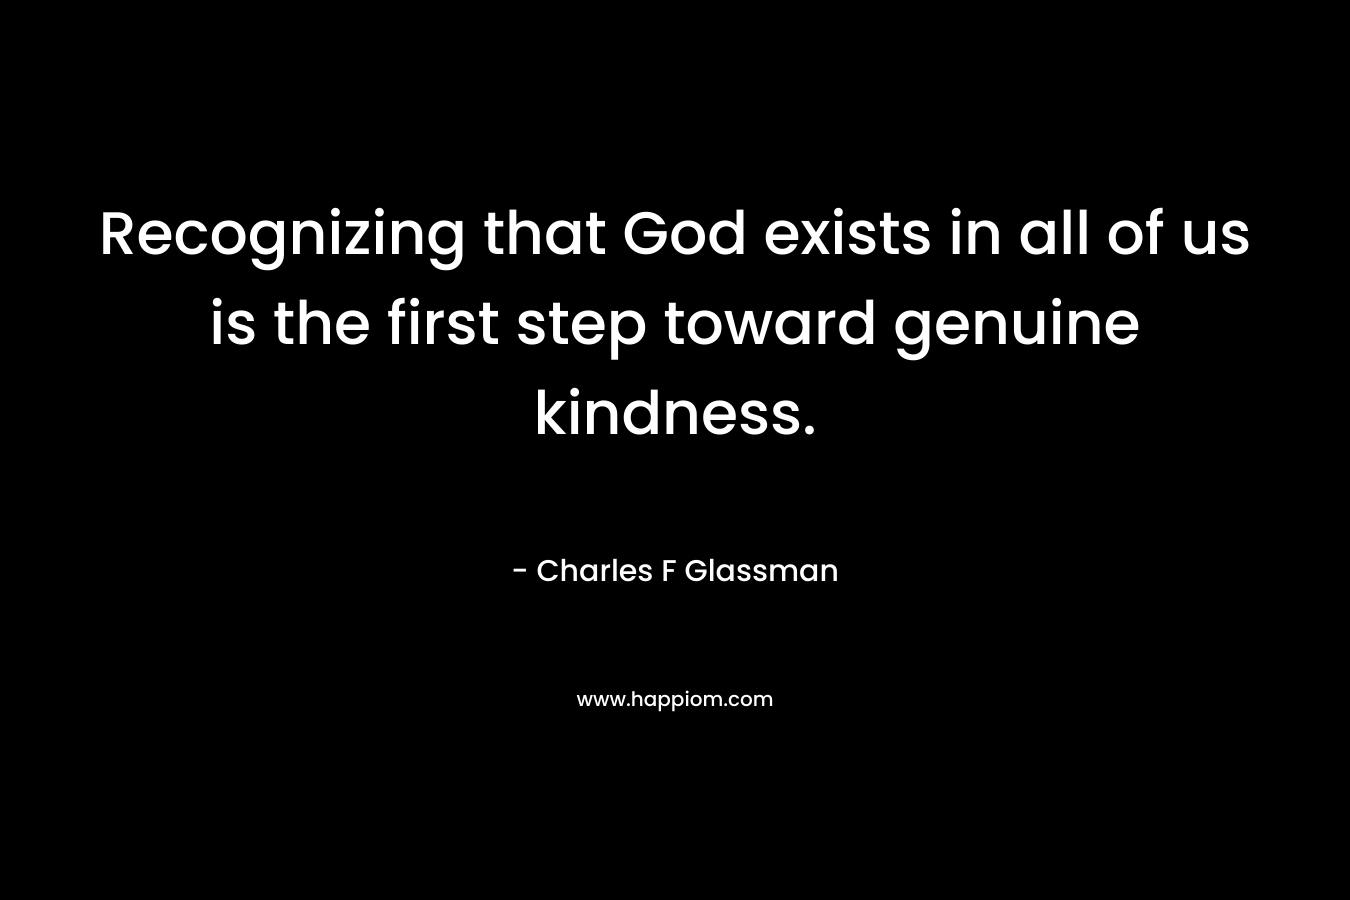 Recognizing that God exists in all of us is the first step toward genuine kindness.